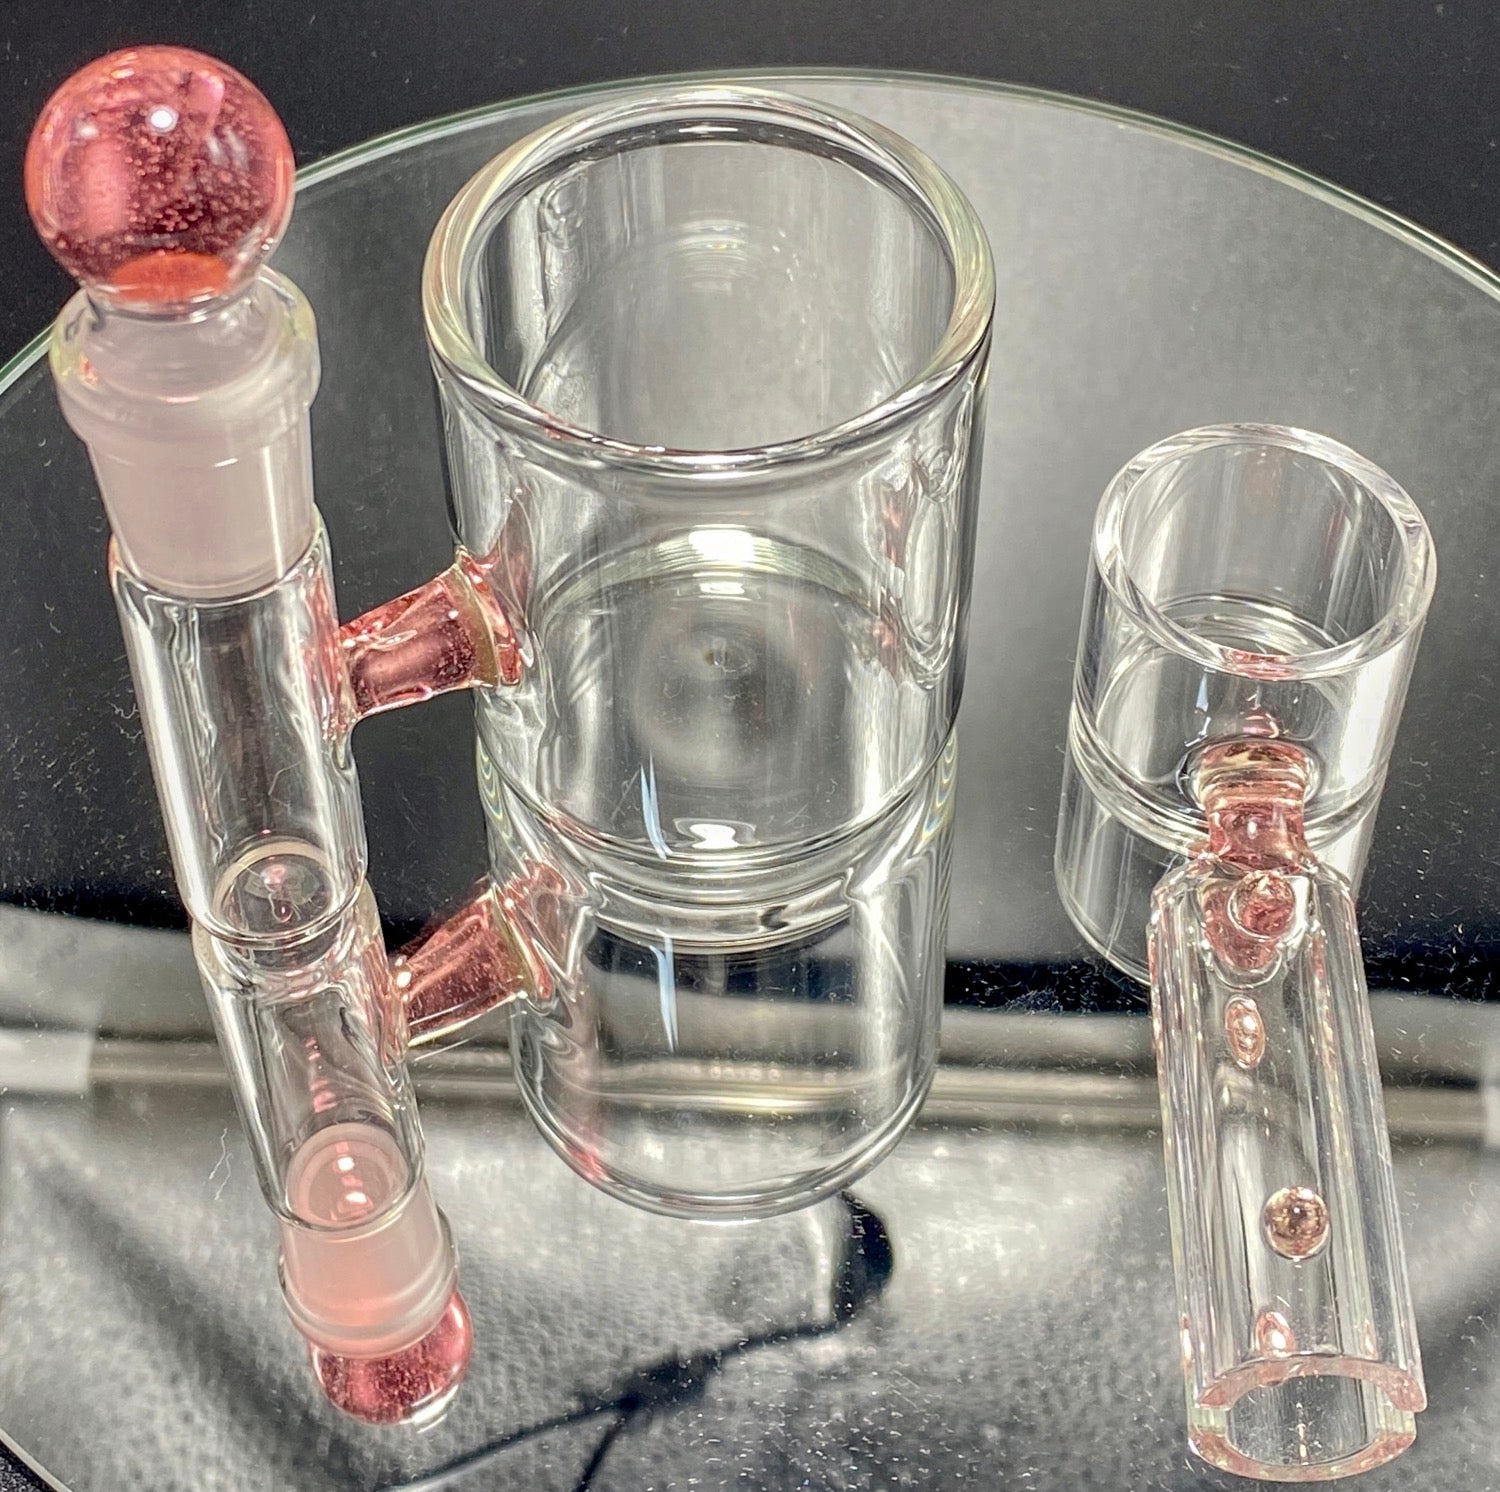 Solid State Concepts Pink Dab Set - TheSmokeyMcPotz Collection 